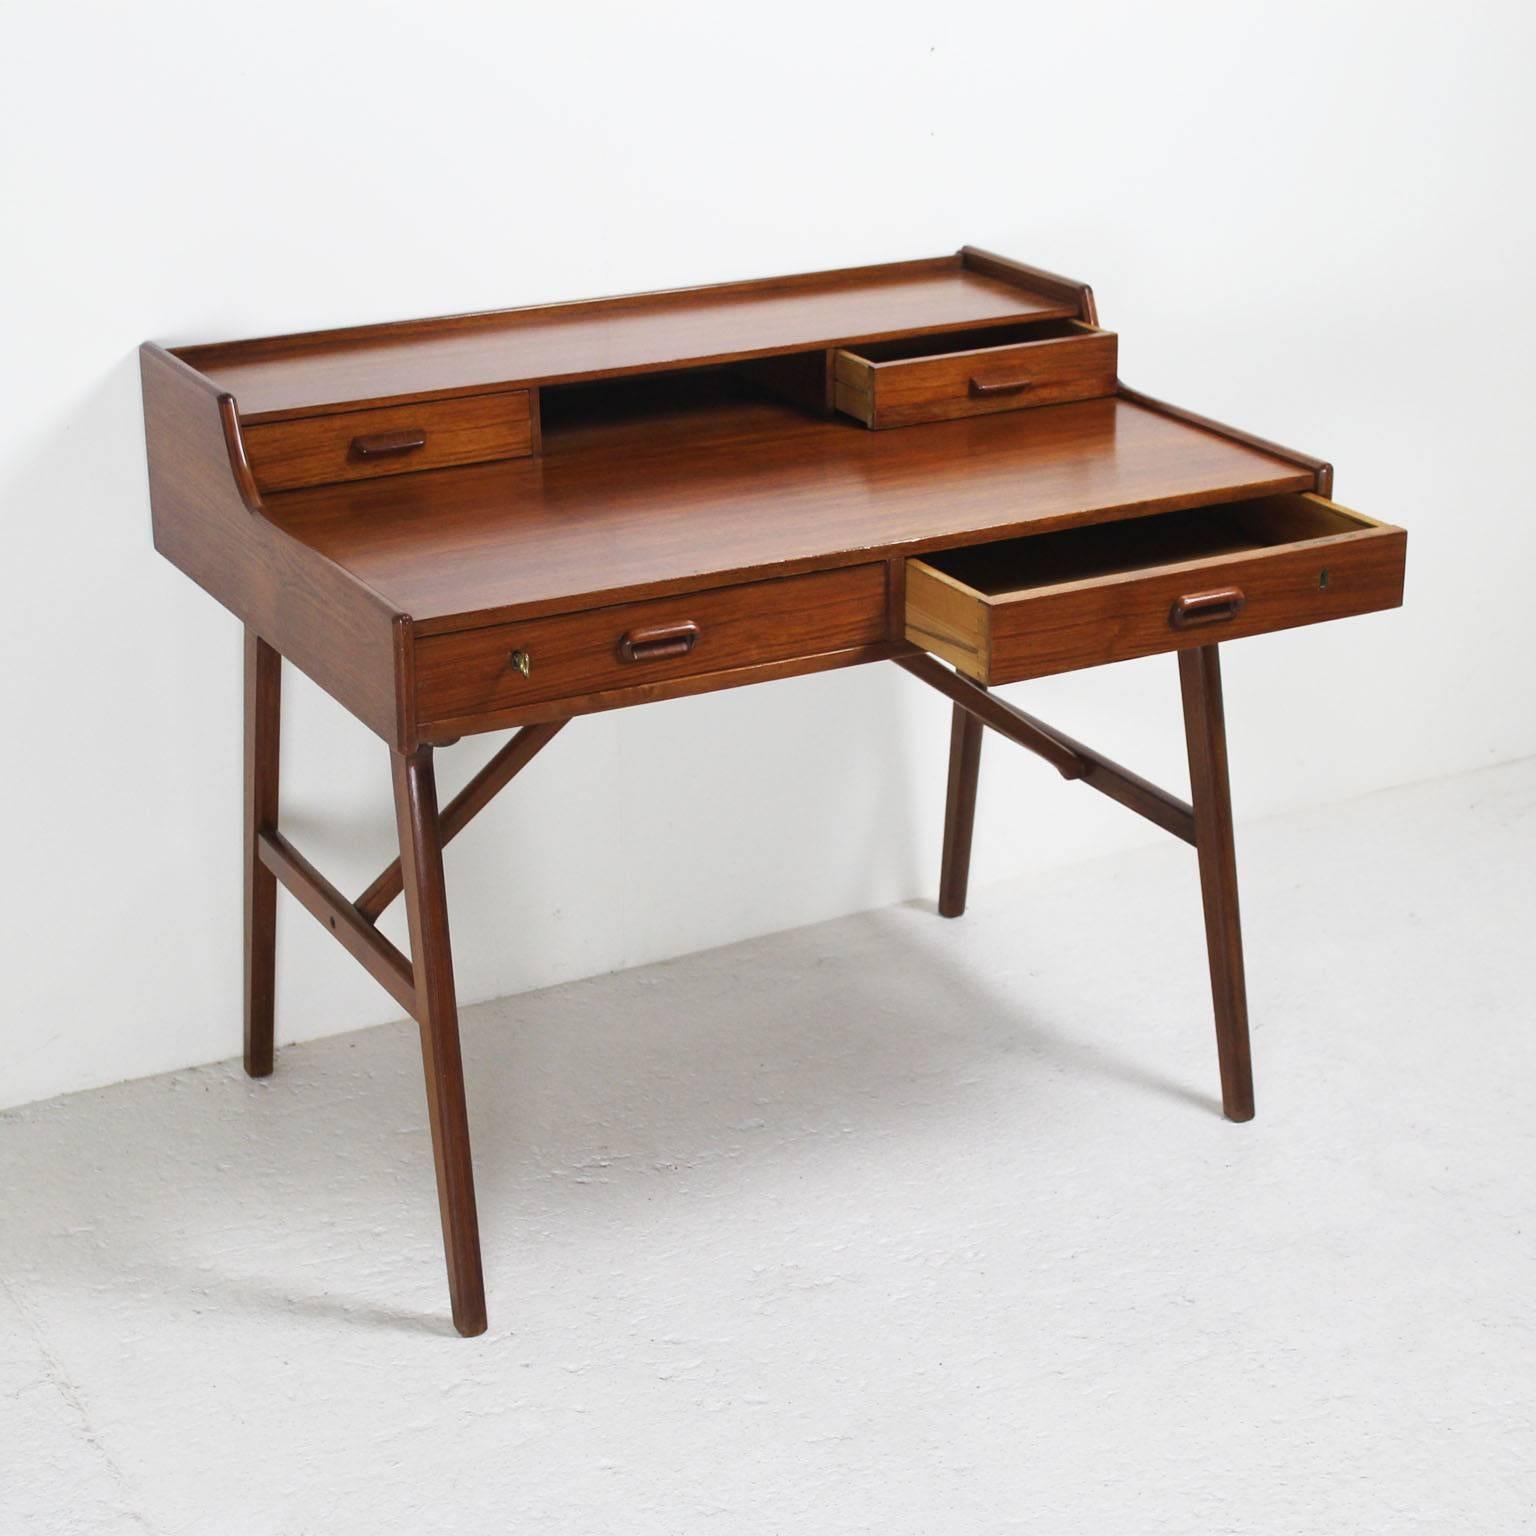 This refined Danish desk is really functional thanks to the two drawers opening on the front and the two other ones on the upper side. The legs are joined by a triangular crosspiece. The total height is 83 cm.